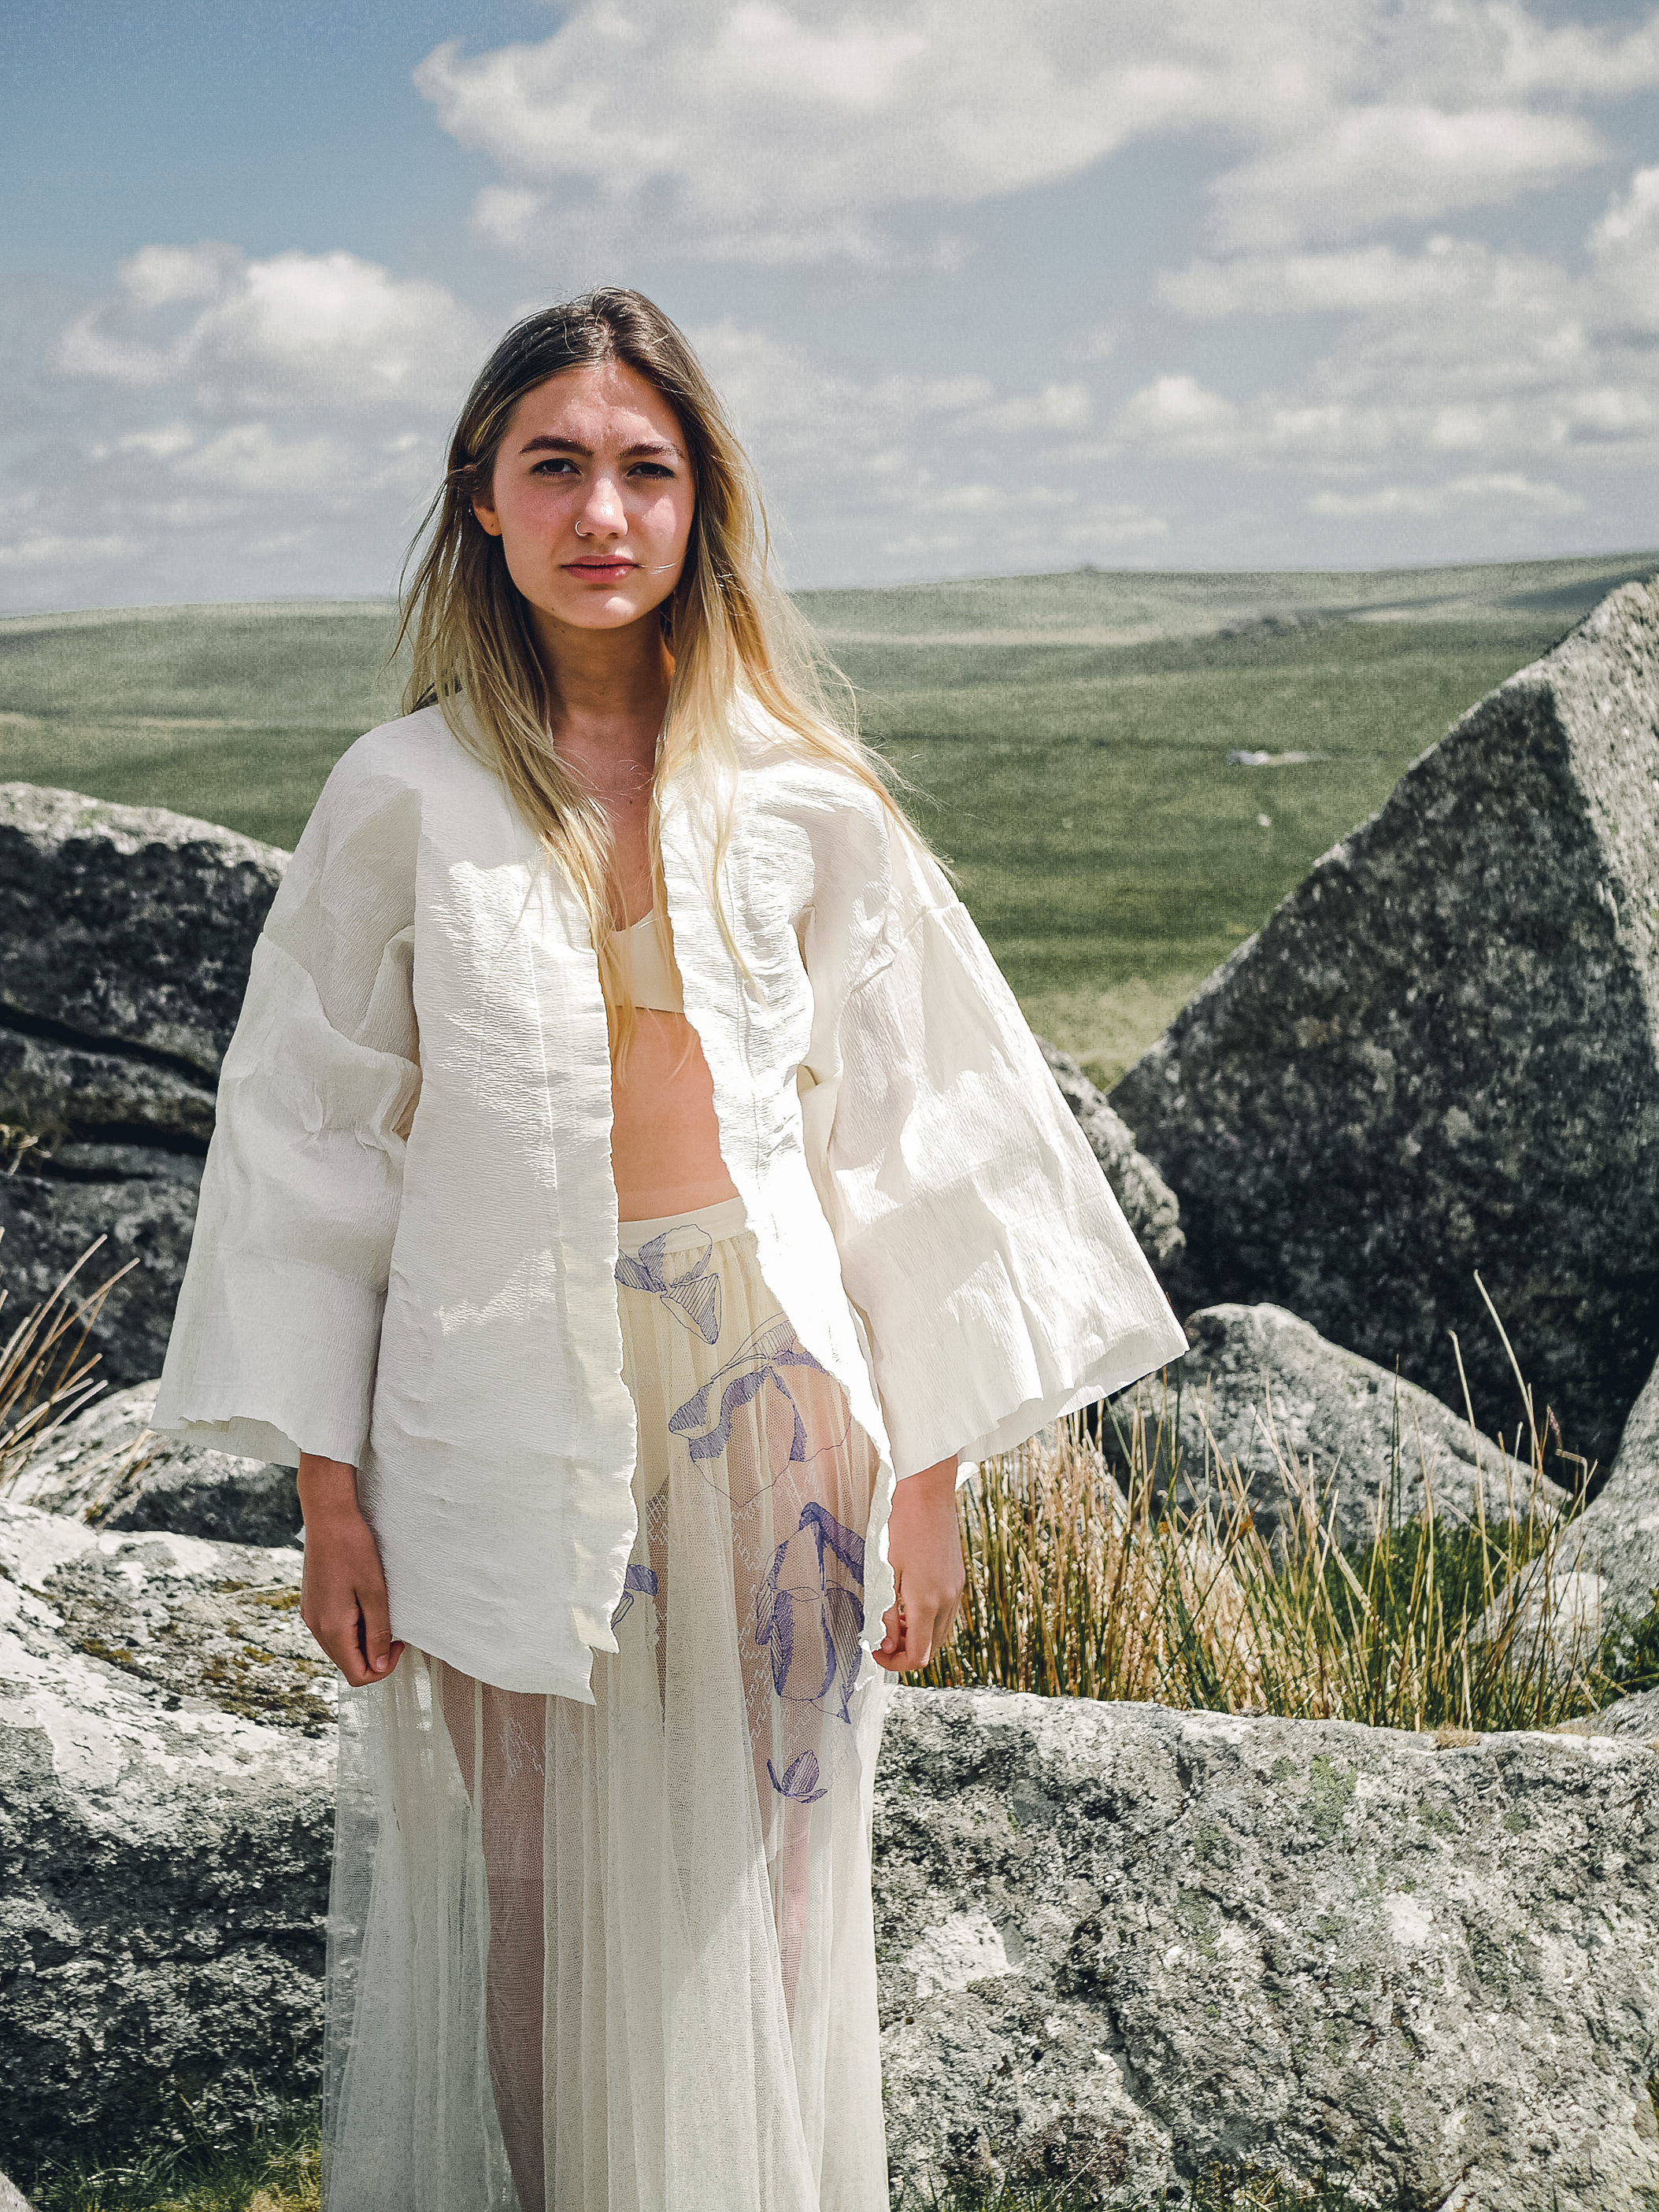 Crepe Kimono for which Jess was awarded the Bronze Creative Conscience Textiles Award Image Credit Jess Strain